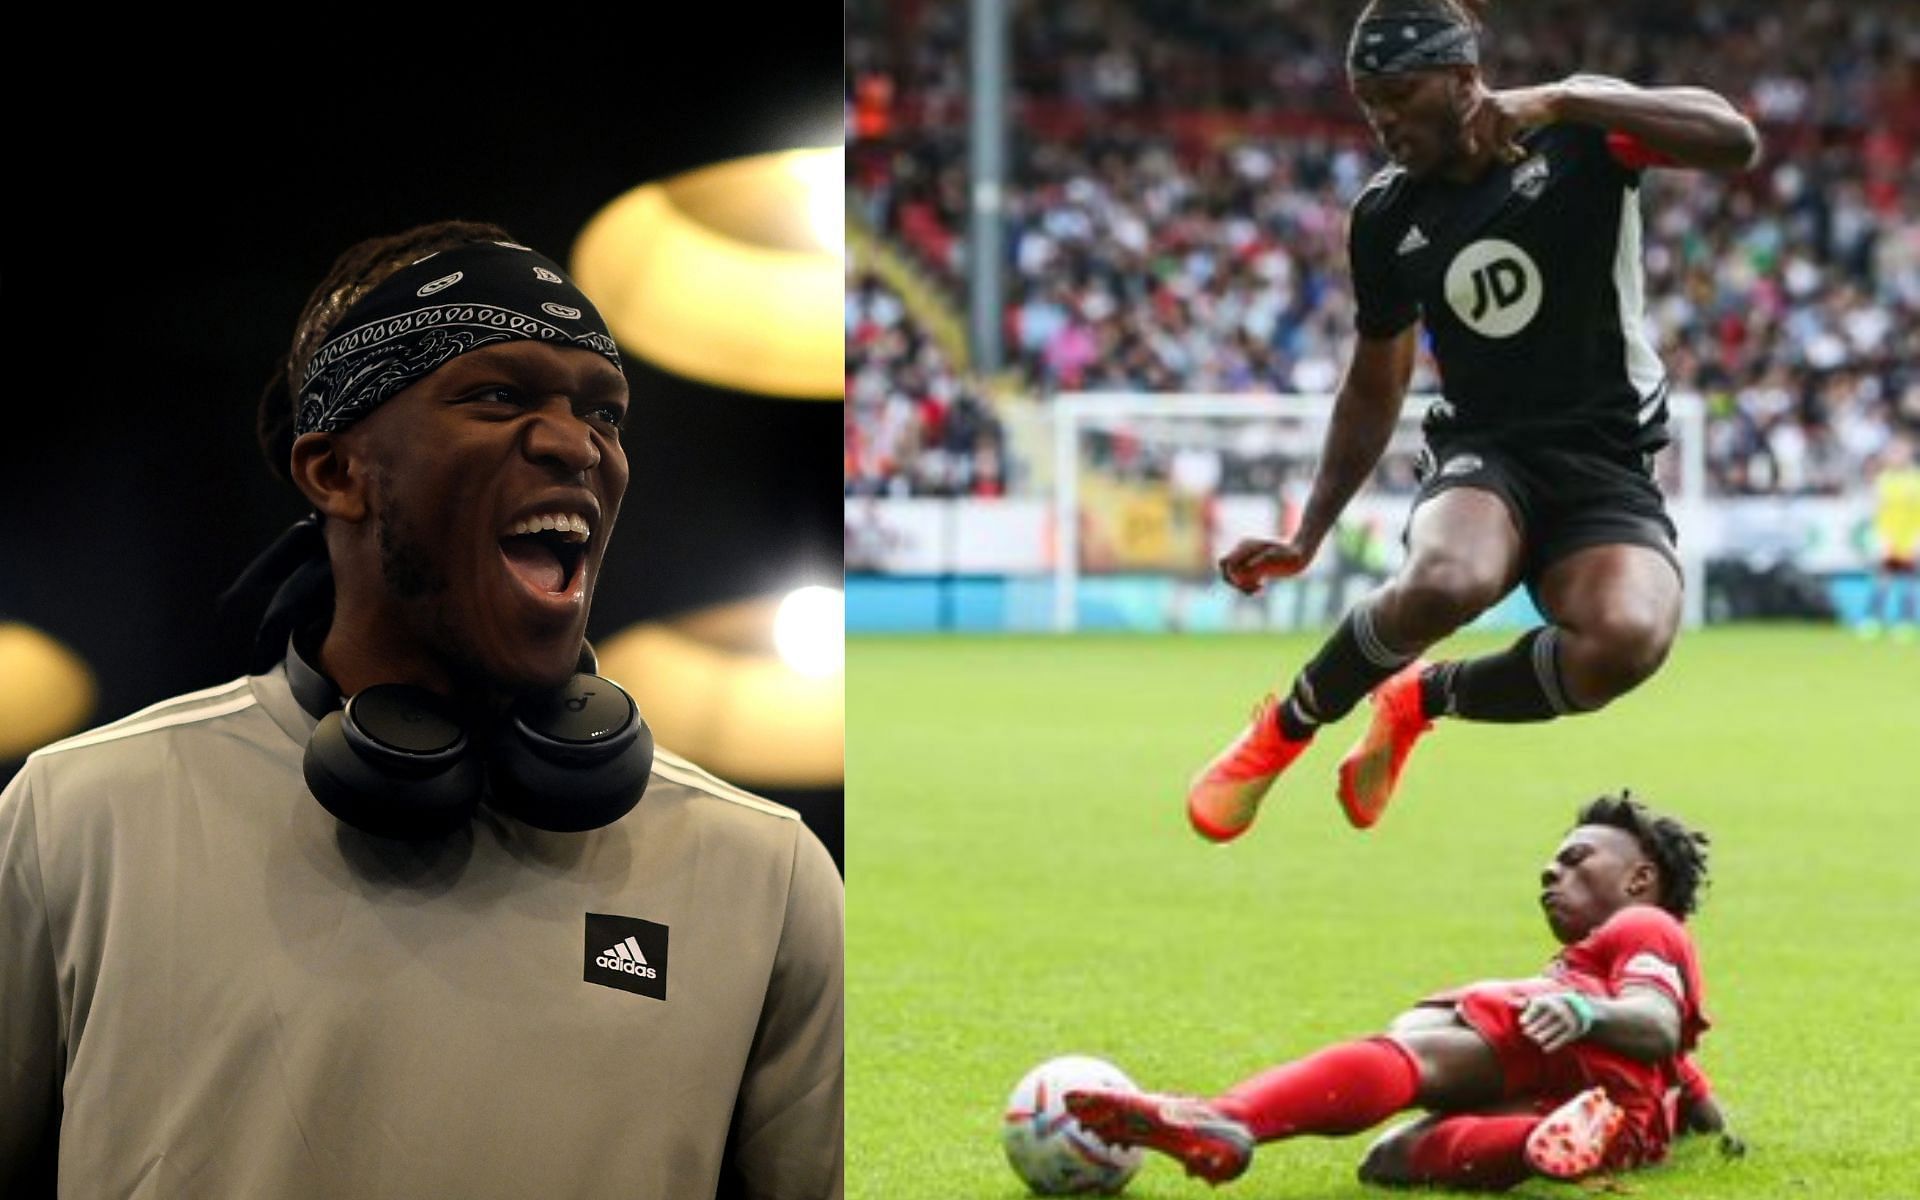 KSI reacts to IShowSpeed's 15second tackle